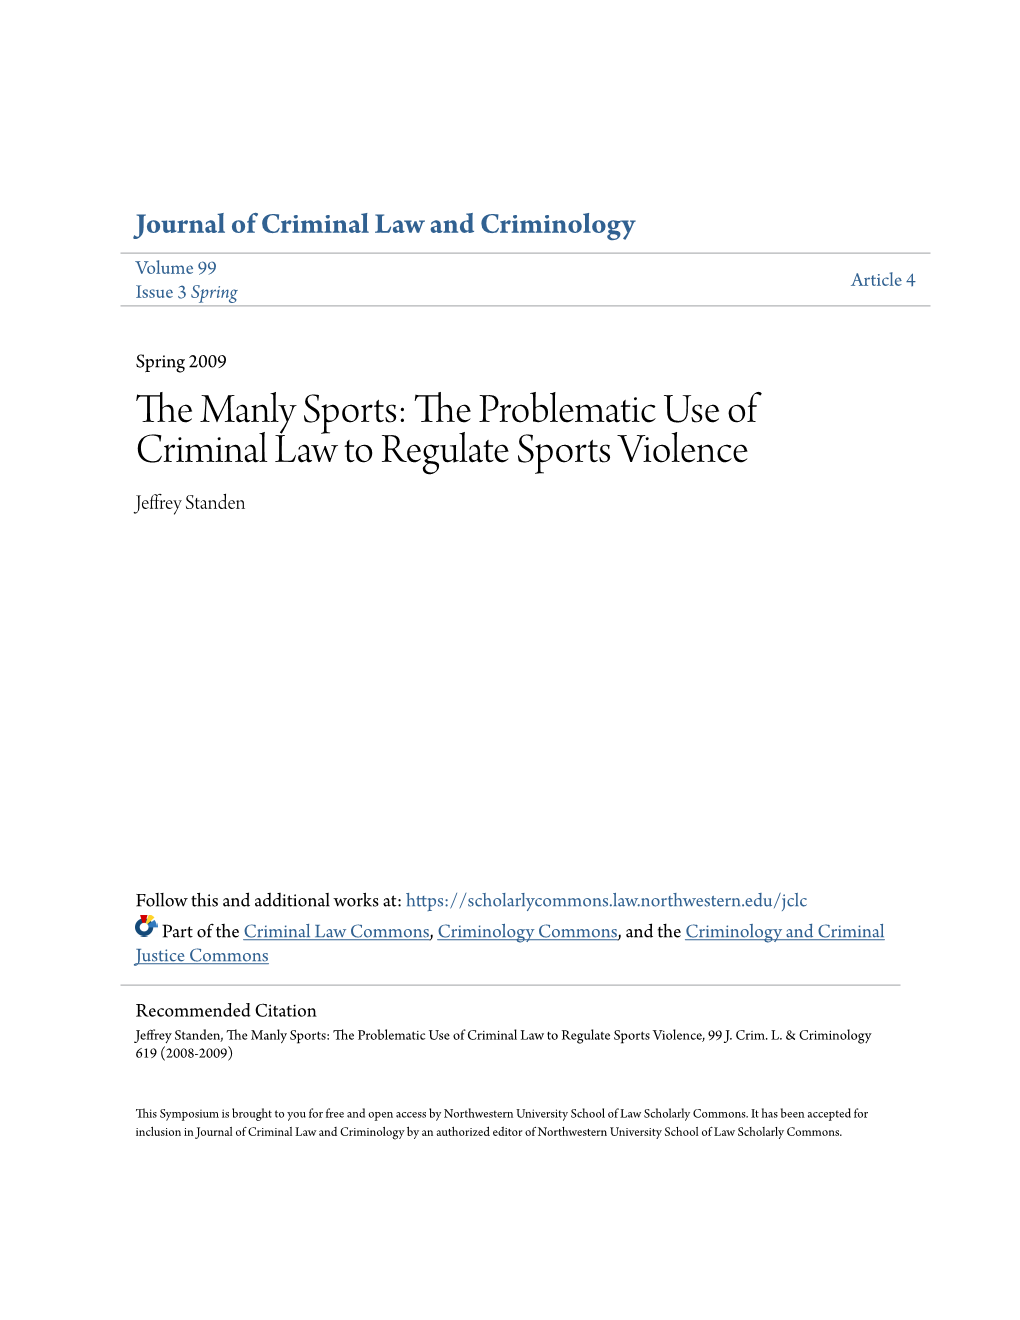 The Problematic Use of Criminal Law to Regulate Sports Violence